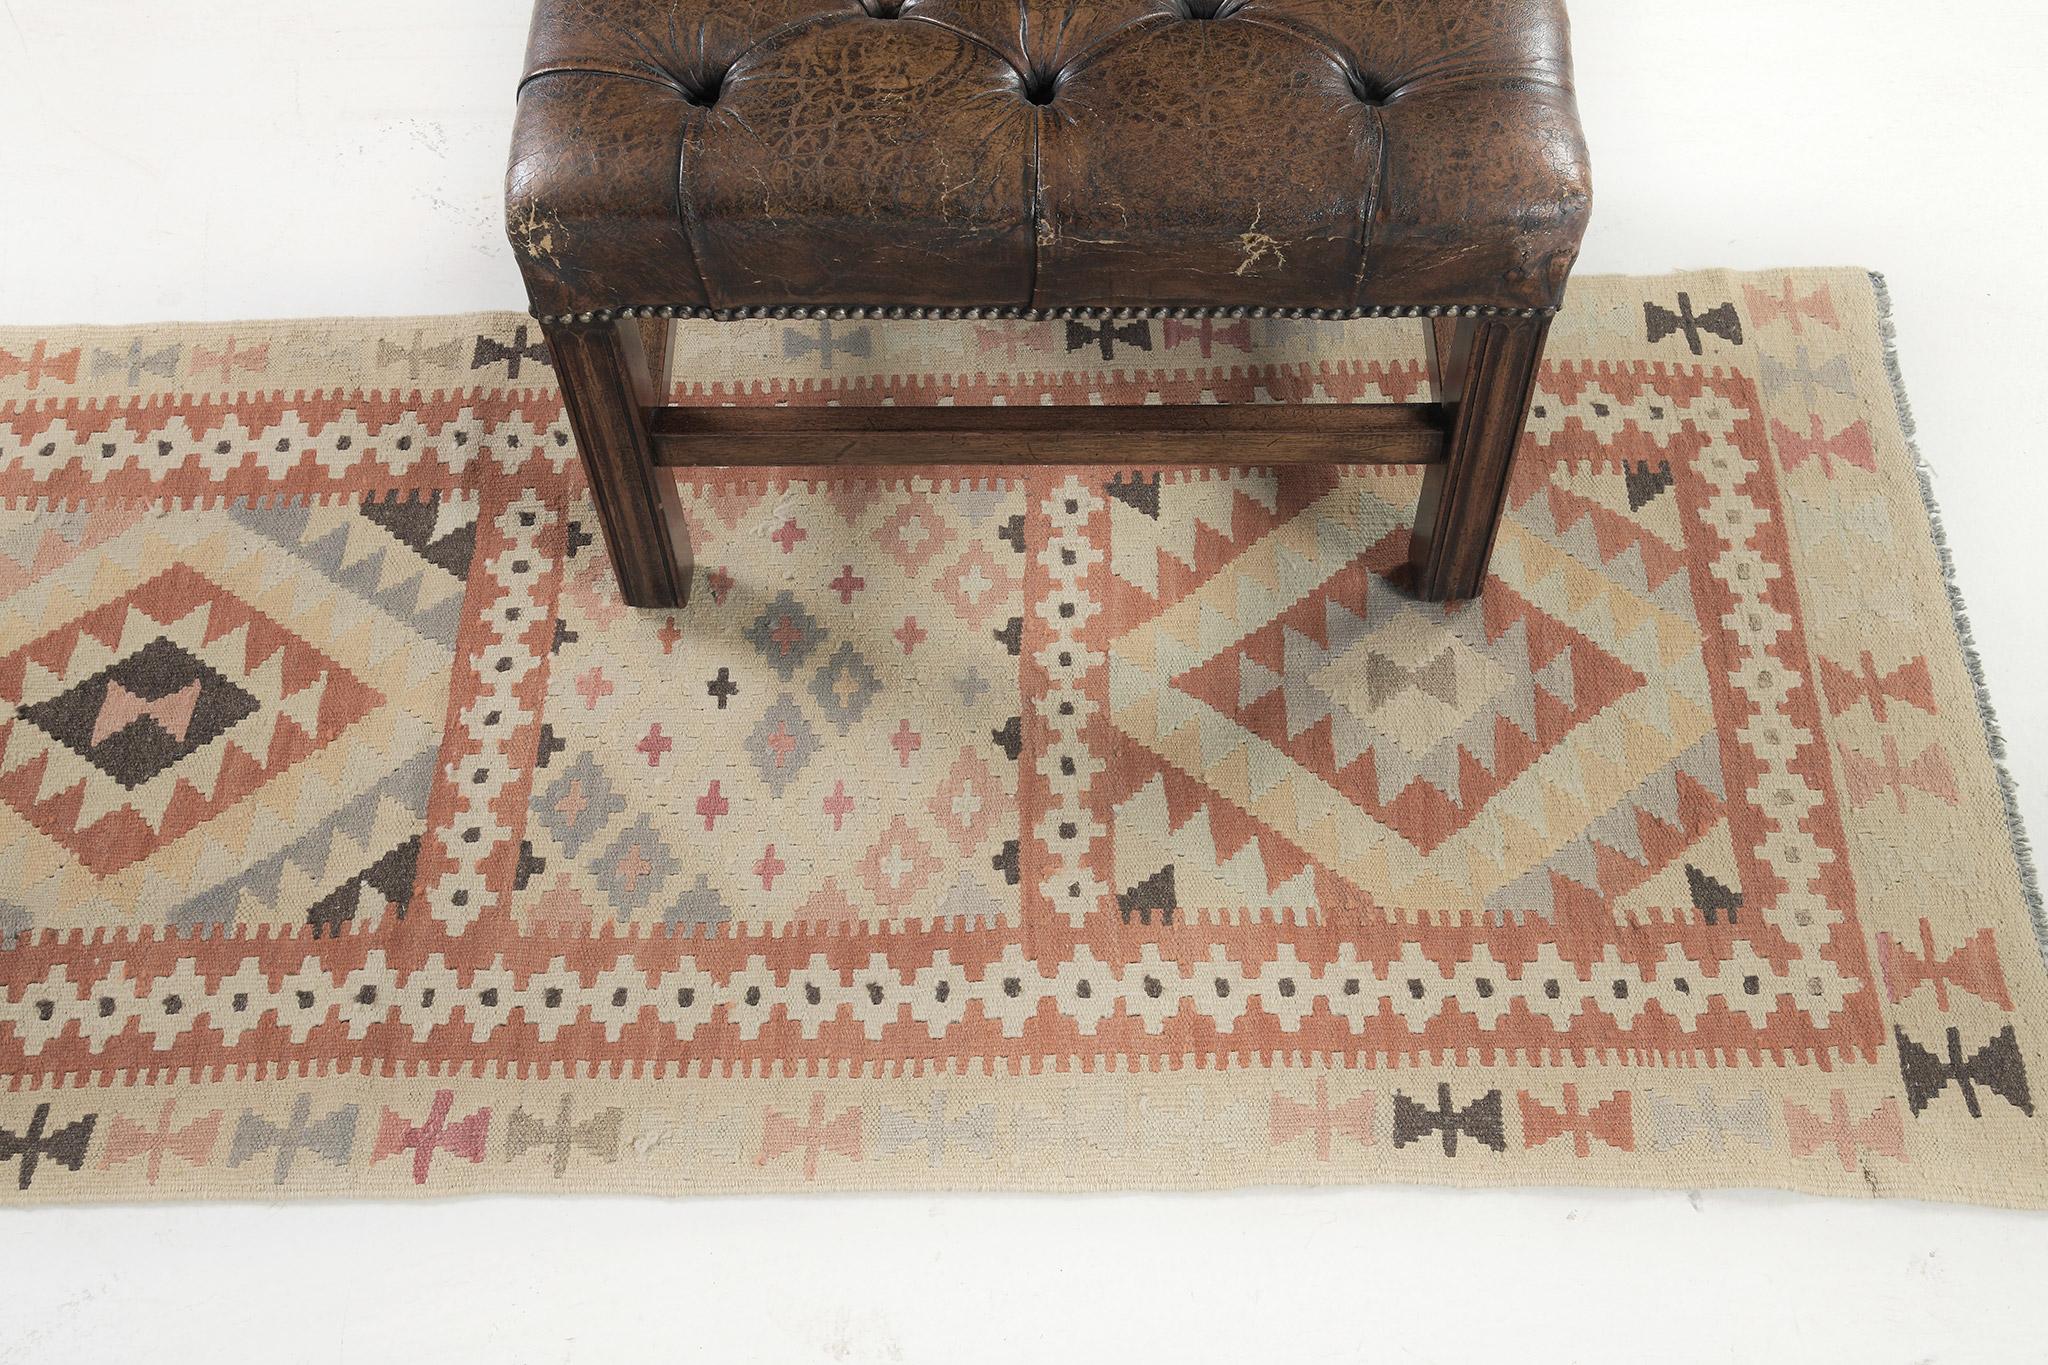 Uplift your room with so much history and complexity with our flatweave Kilim. It highlights the diamond patterns and tribal symbols on its core. These strong details brighten up the mood of every guest. Fashionable for every designed space that